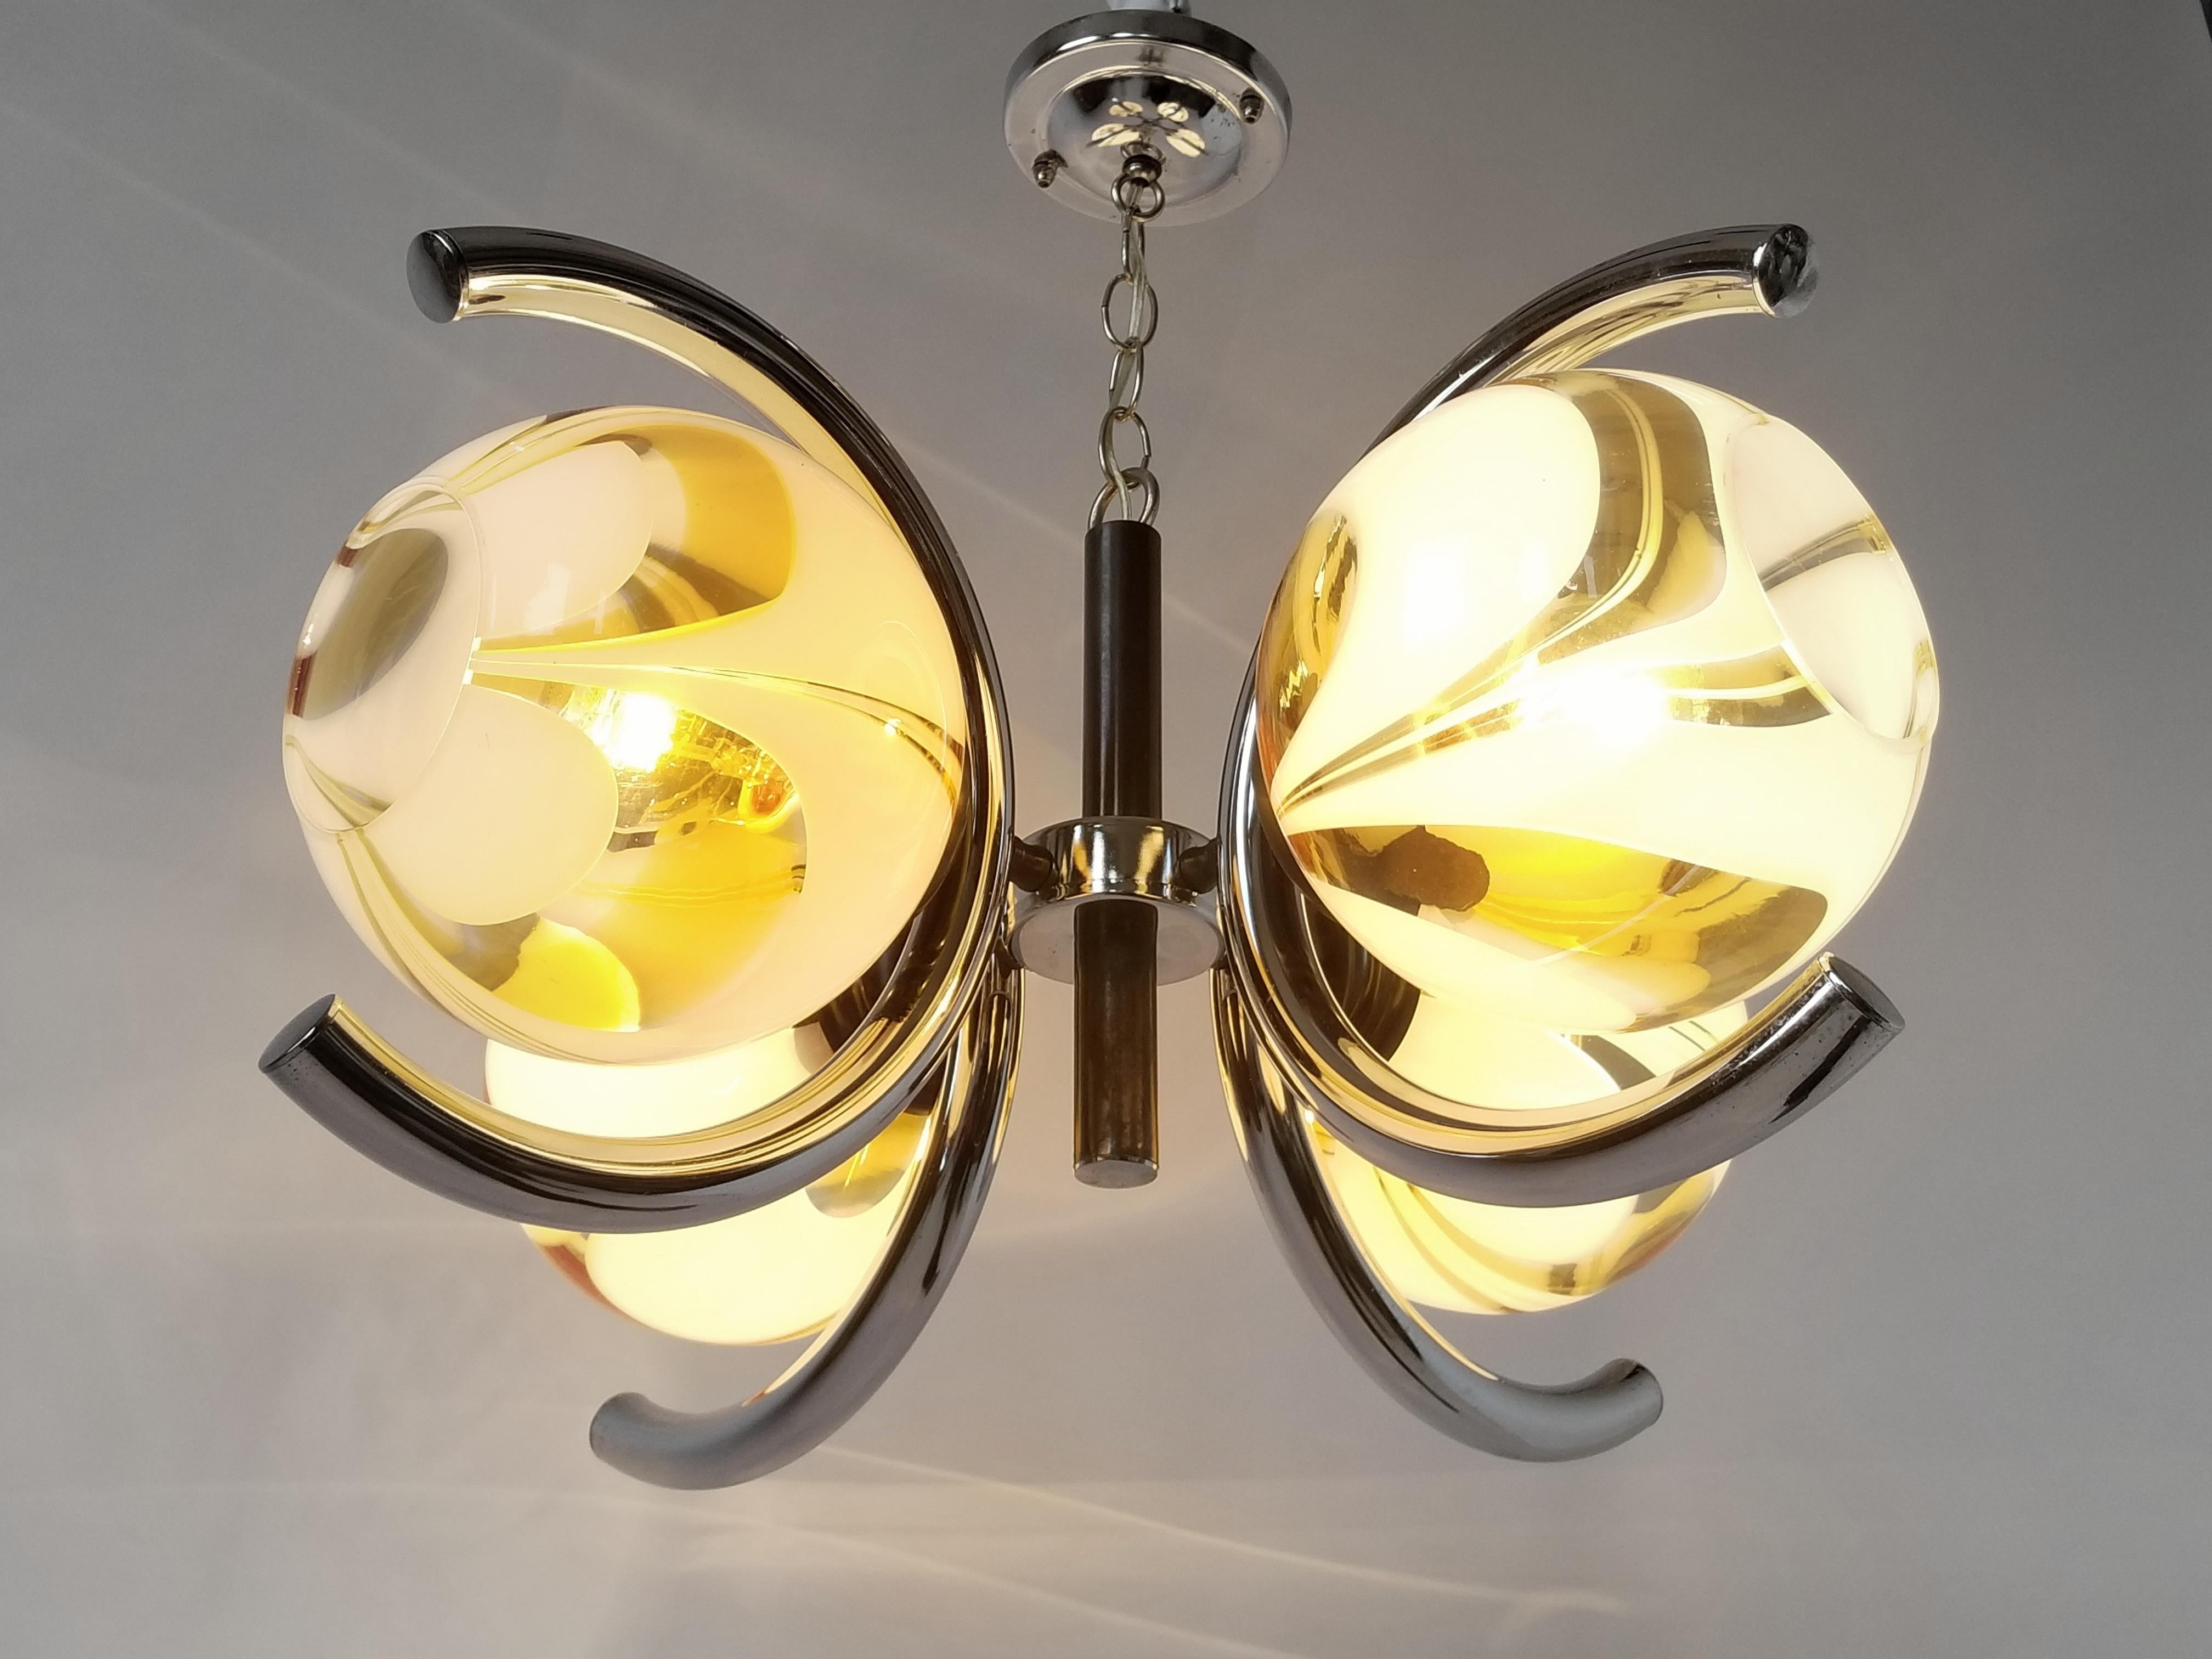 Superb mouth blowed glass shade in the style of Venini sitting on a chrome base. 

Glass shade measure 8 in. diameter. 

Four regular E26 size socket rated at 60 watt each. 

Measure: 23 in. wide by 12 in. high, chain length to your